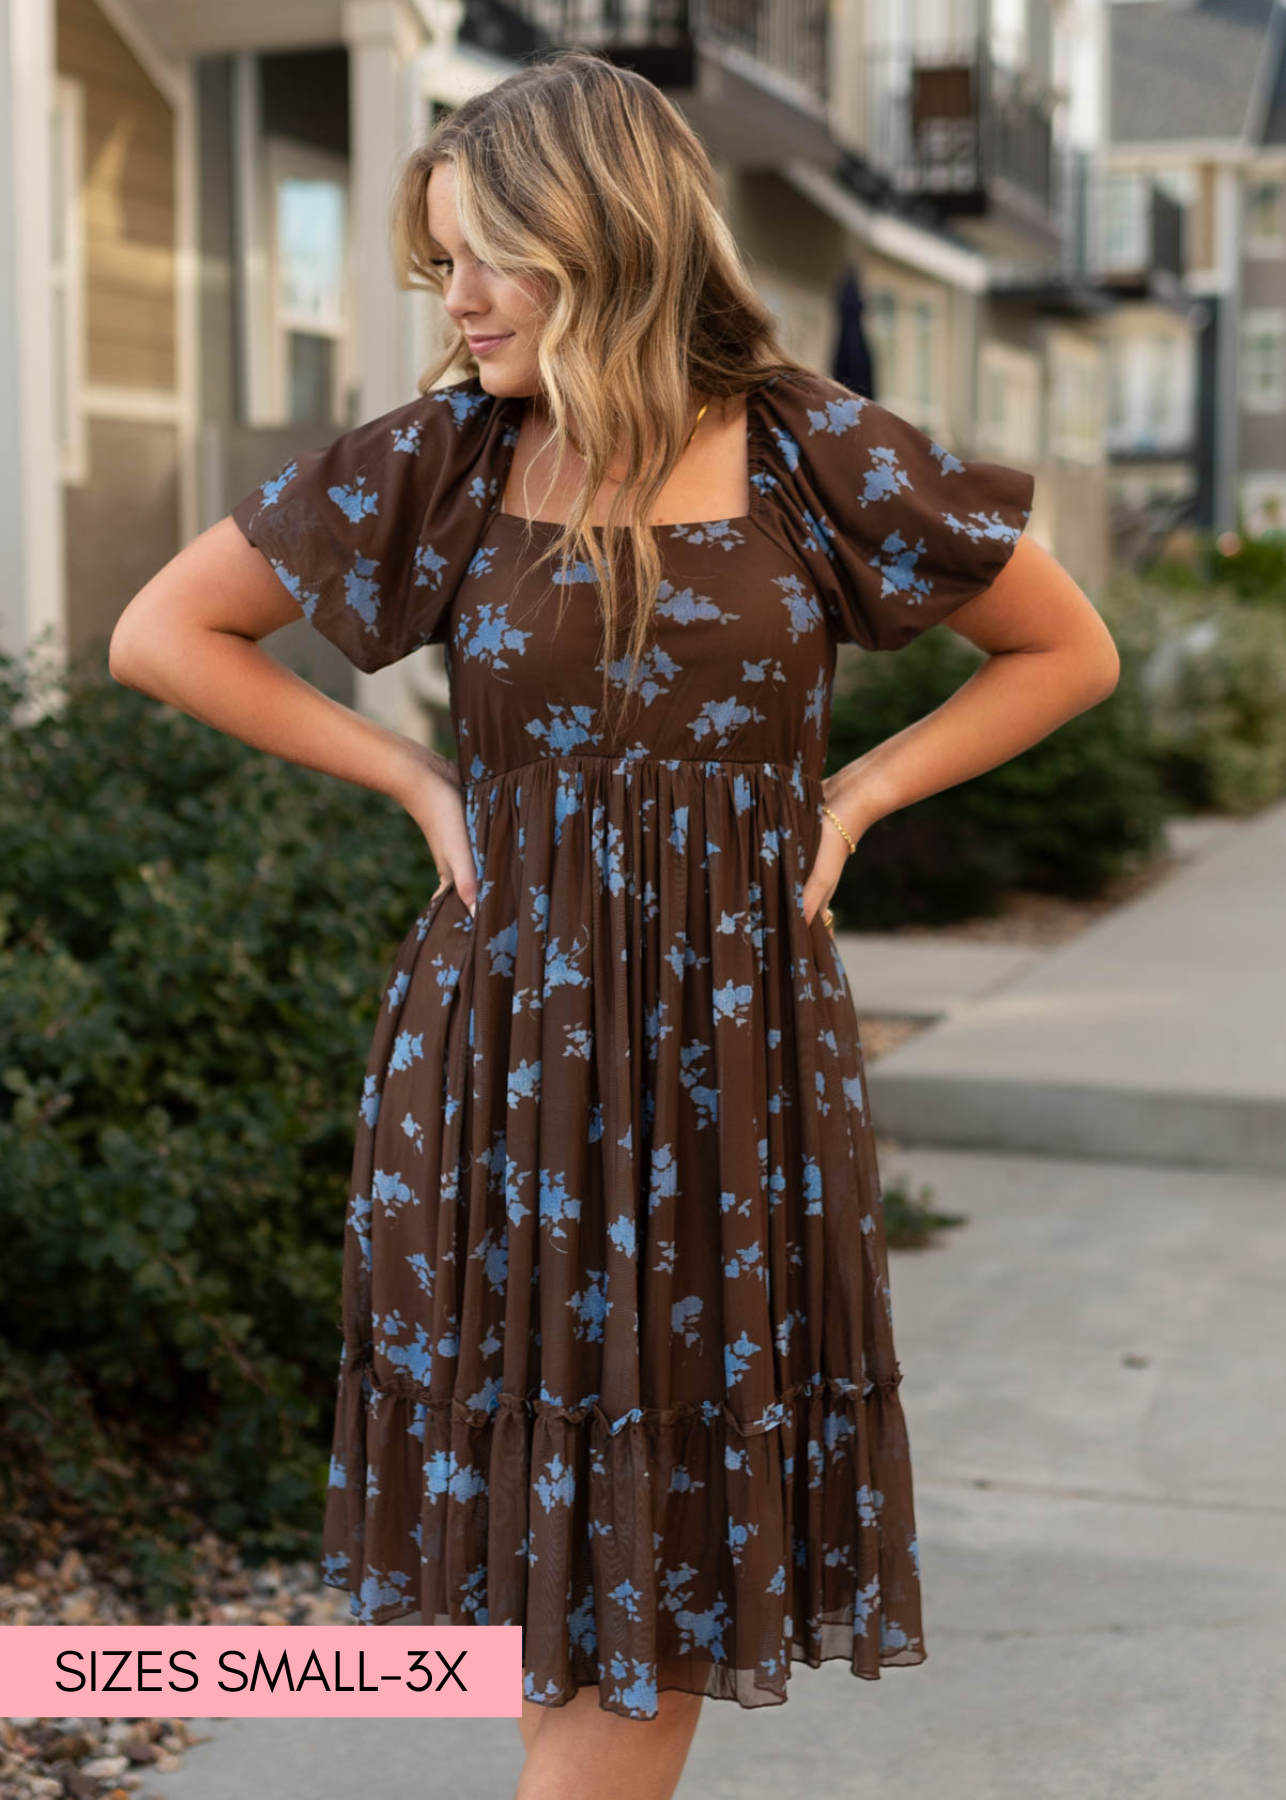 Chocolate dress with light blue flowers and square neck